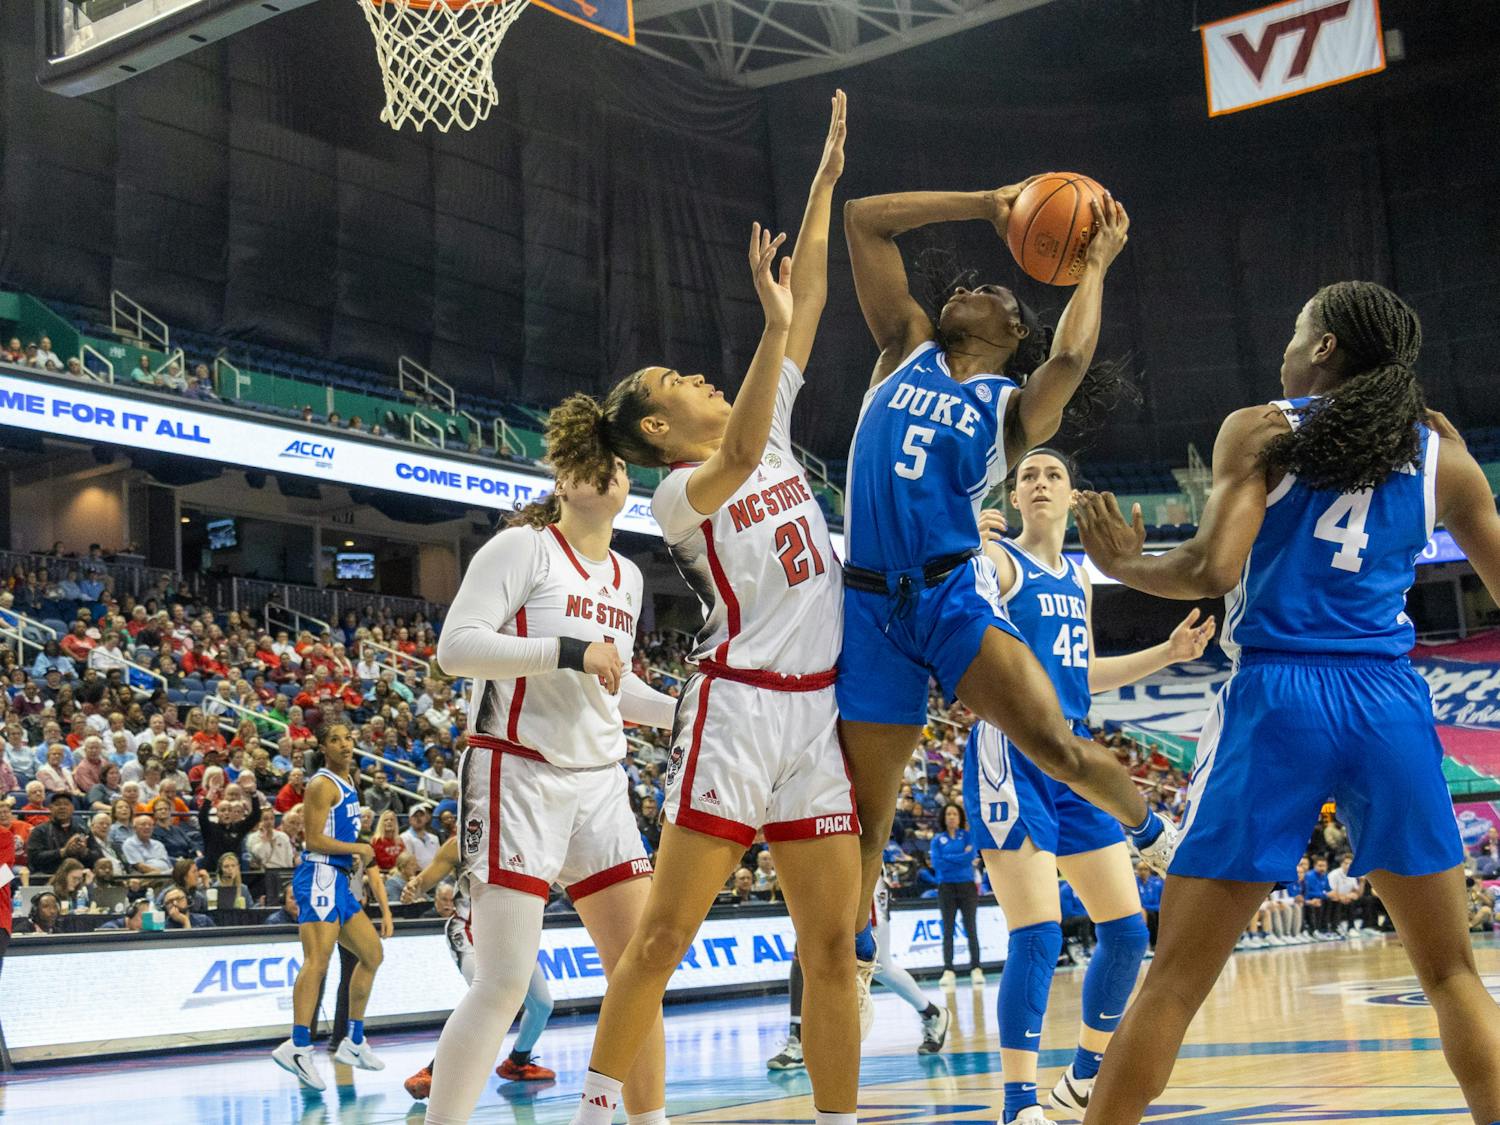 Oluchi Okananwa goes up for a putback in the first half against N.C. State.